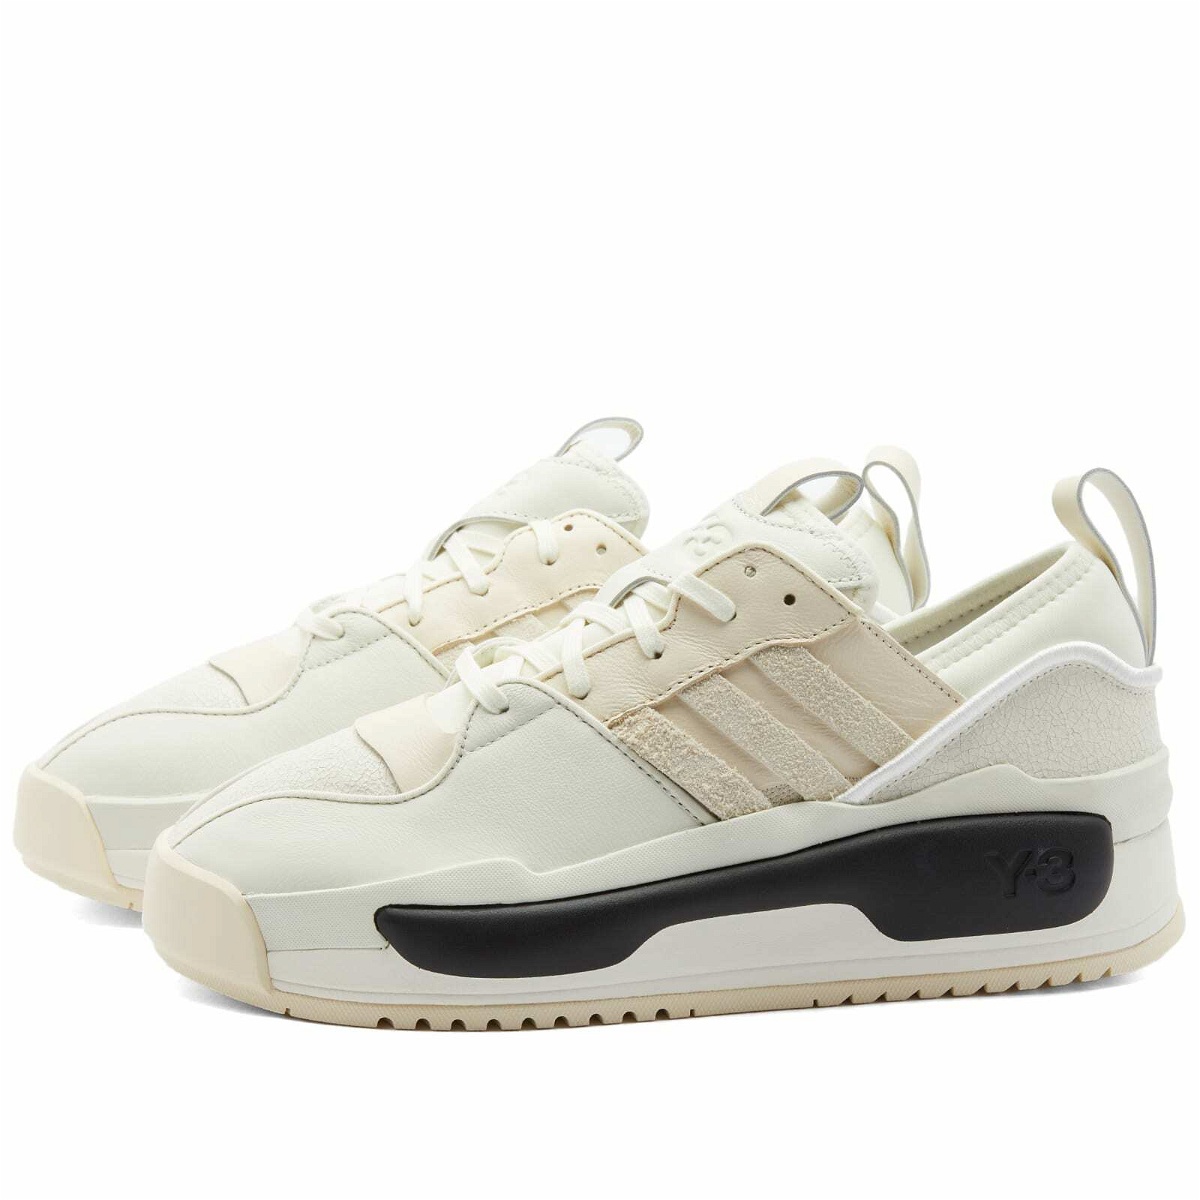 Y-3 Men's Rivalry Sneakers in Off White/Wonder White/White Tint Y-3